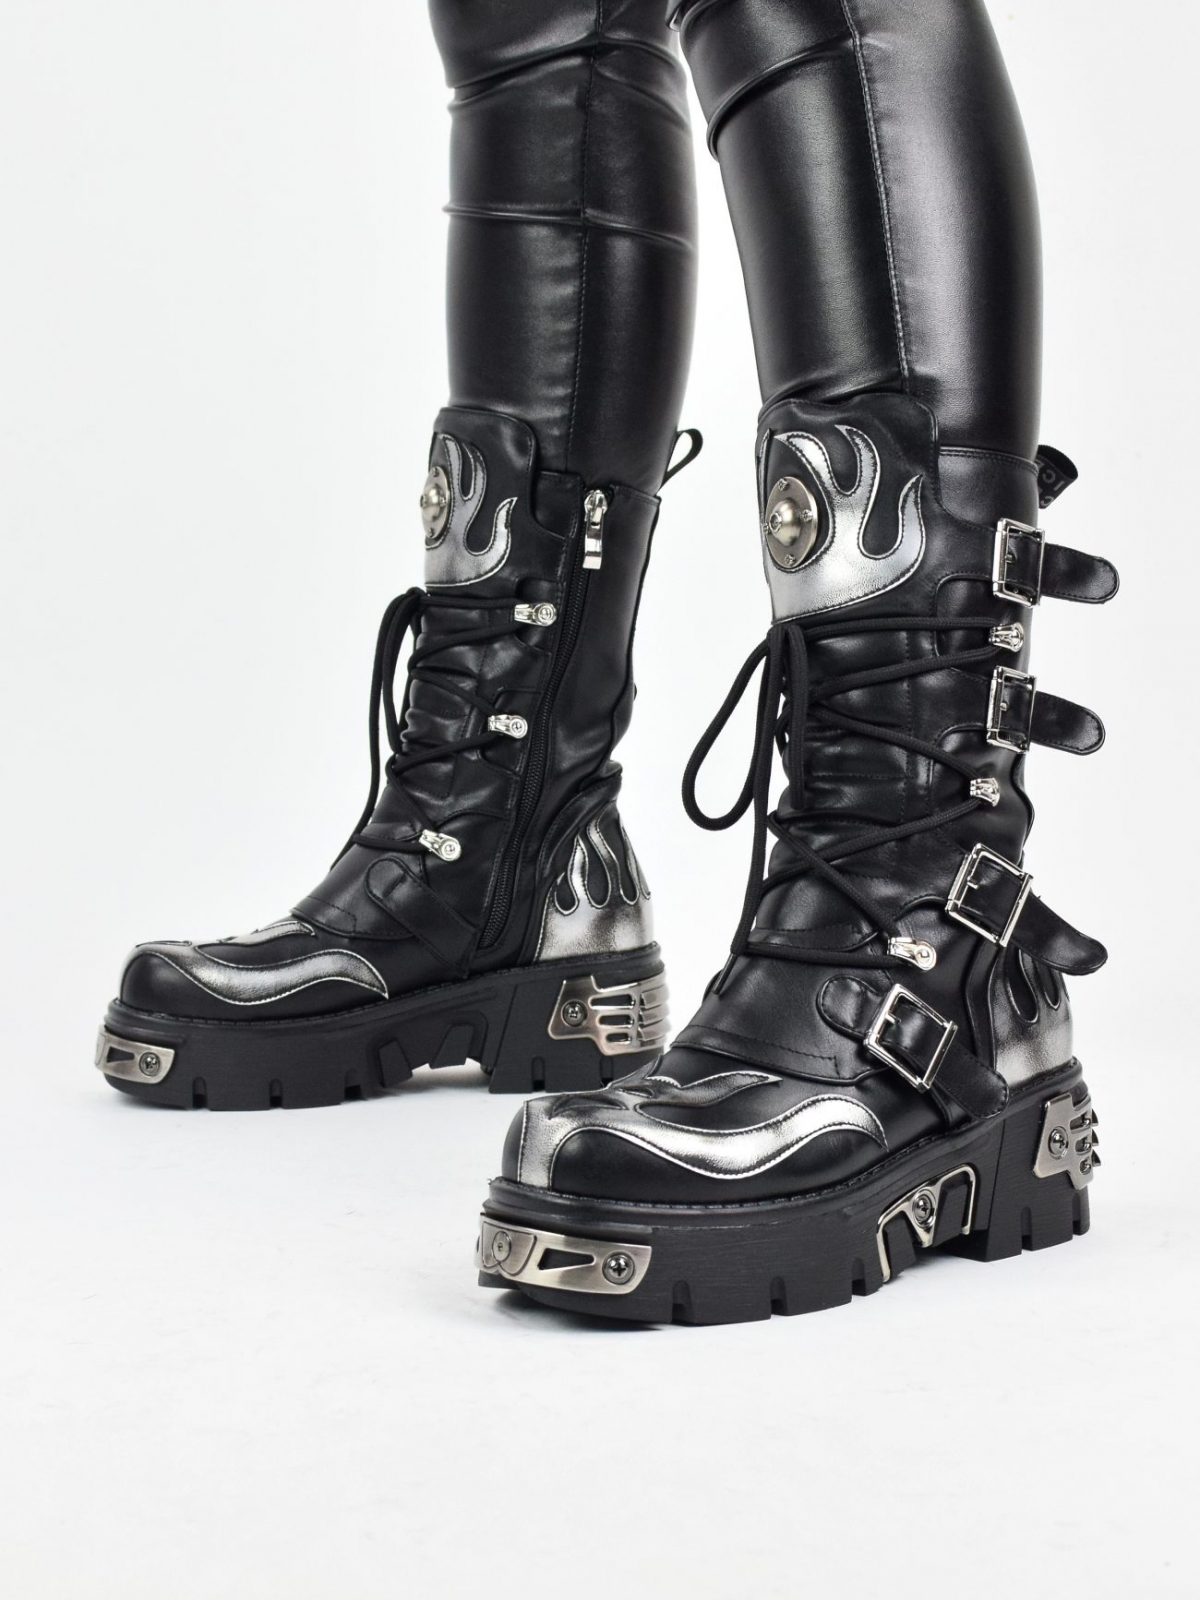 Exclusive design rock style thick ankle boots with metal details in black